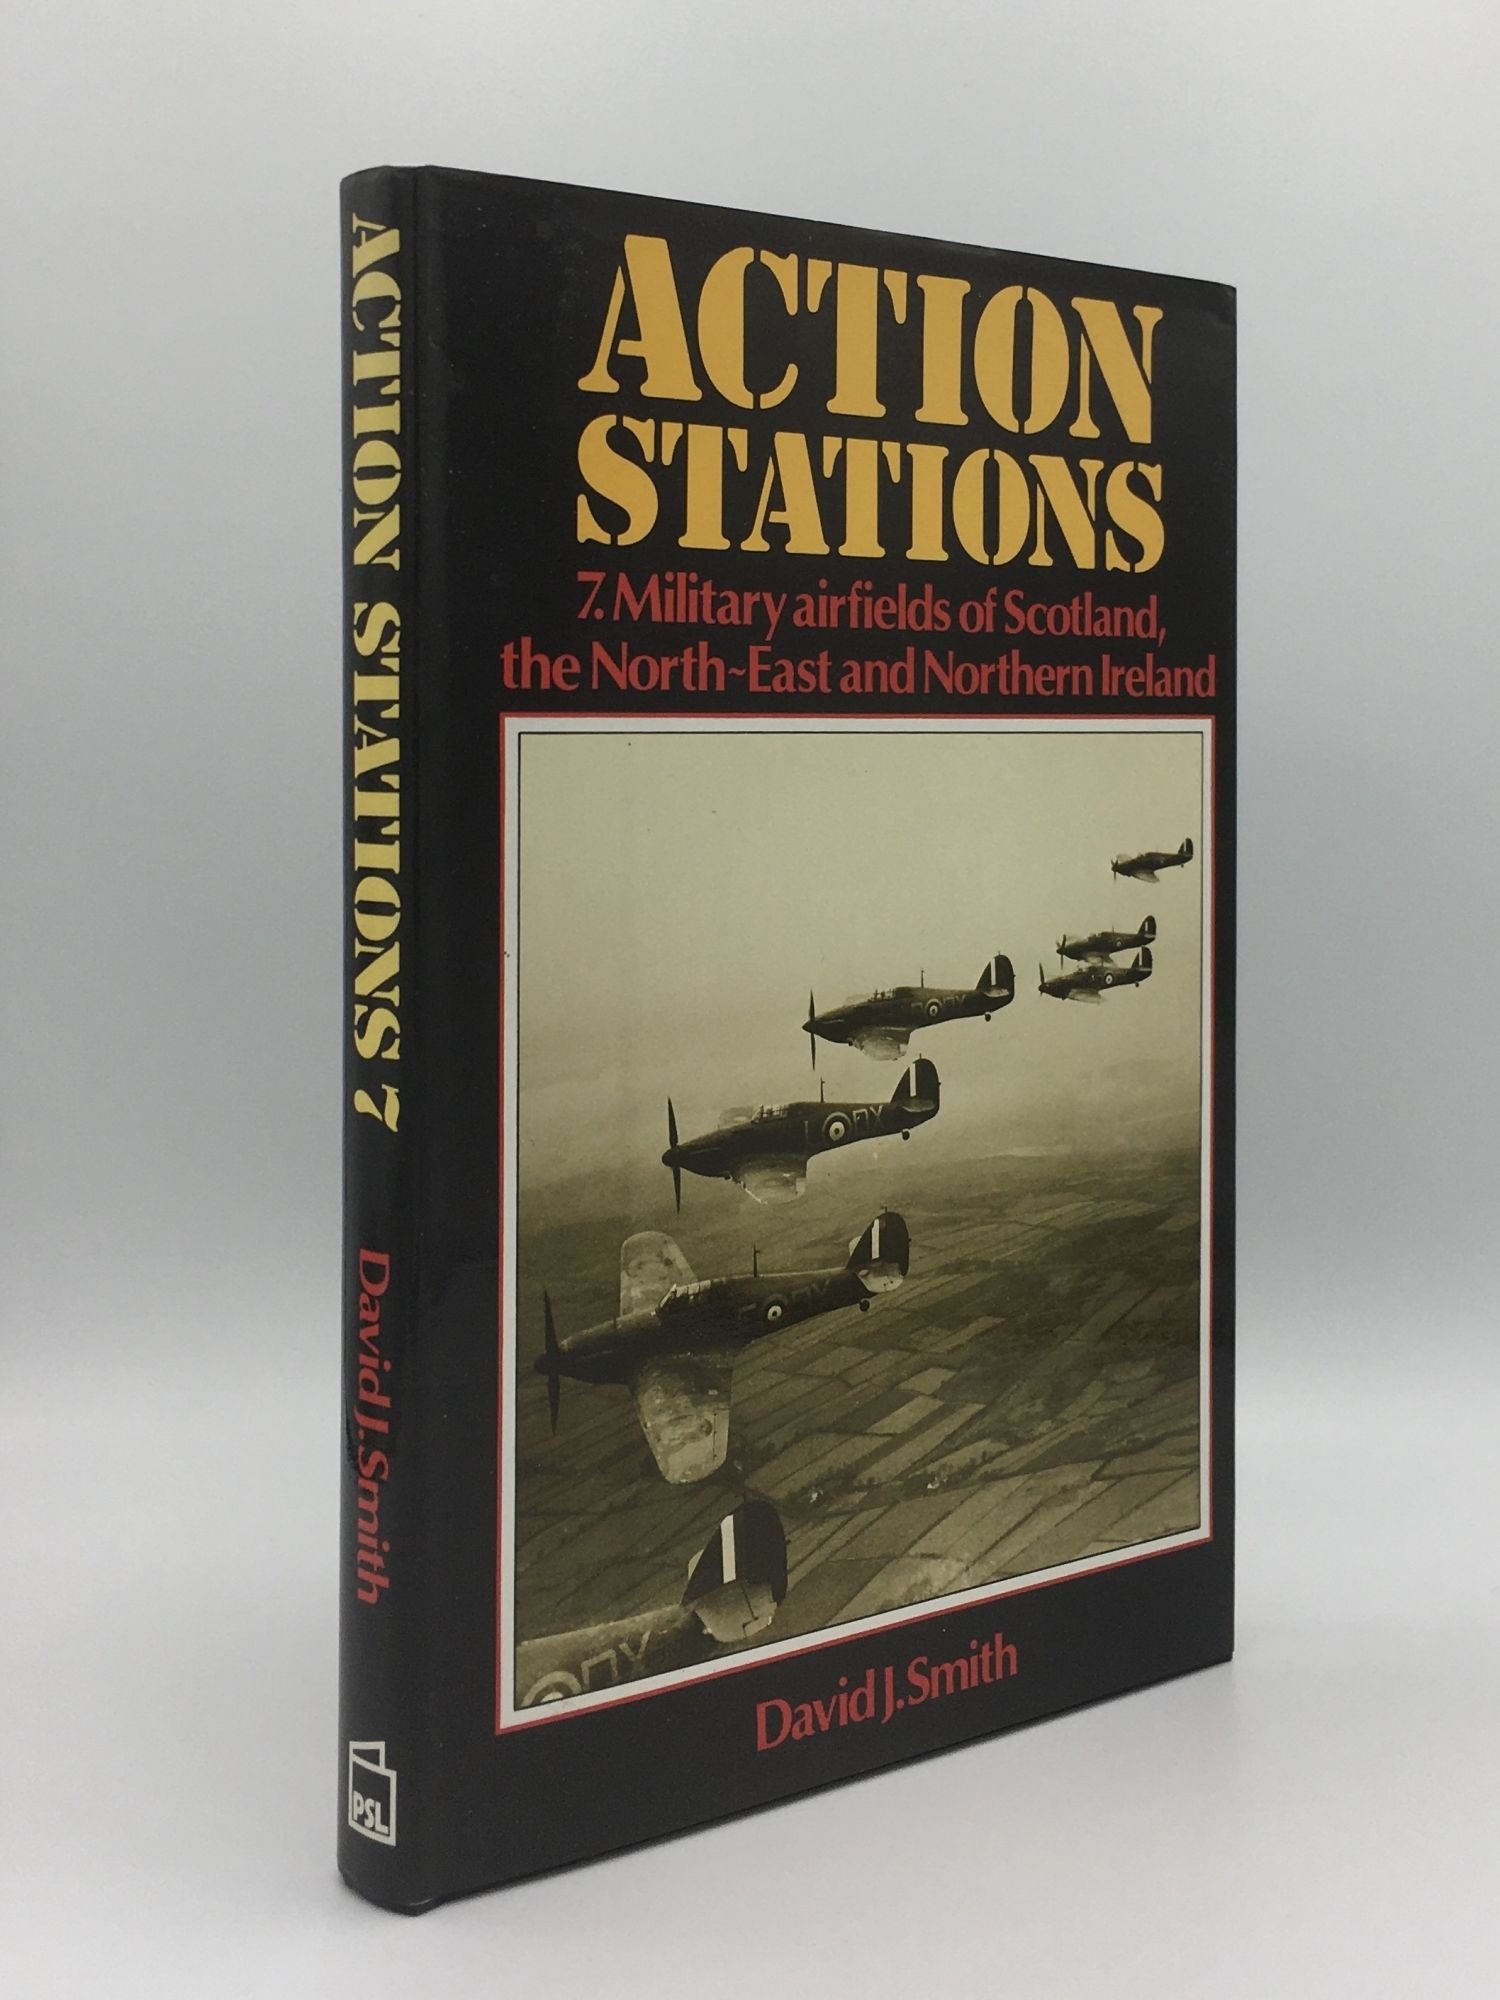 SMITH David J. - Action Stations 7 Military Airfields of Scotland the North-East and Northern Ireland